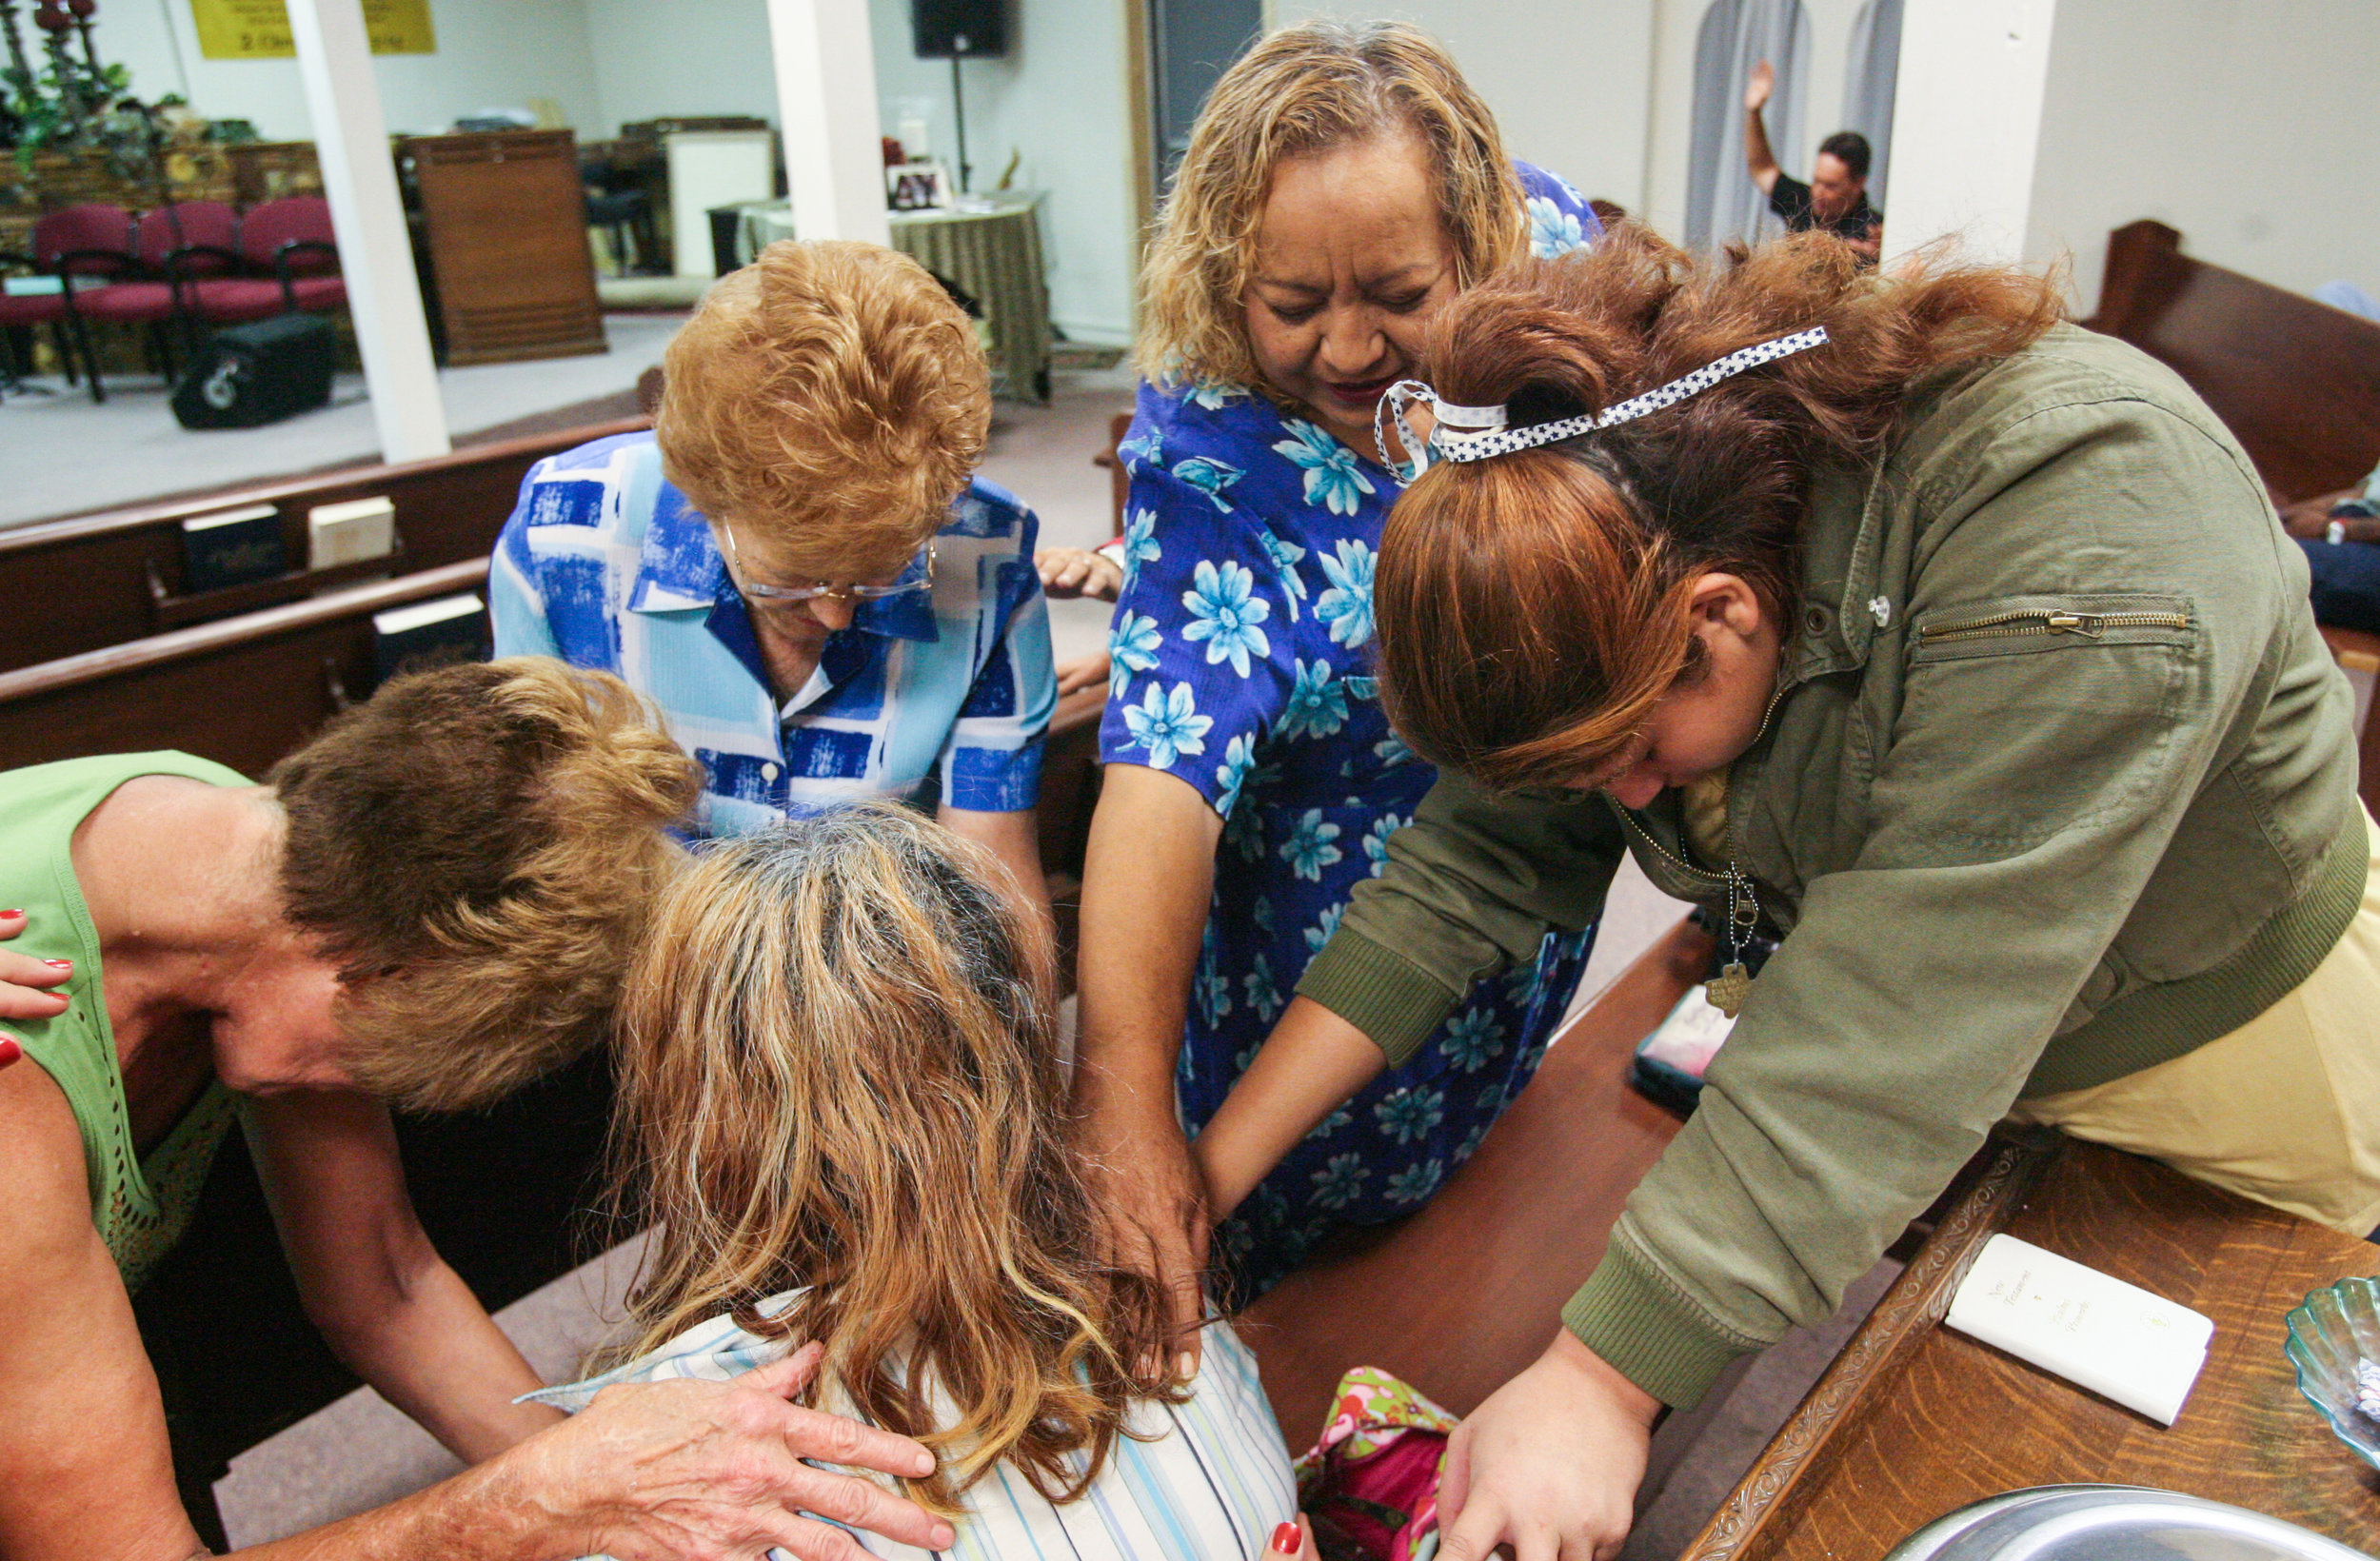  One day after moving into a new apartment, Angelica Brito, 12, from right, and her mother, Juanita Torres, pray with others for a fellow member of the congregation at Faith Temple Fellowship church in Odessa, Texas. The two attended the church, wher